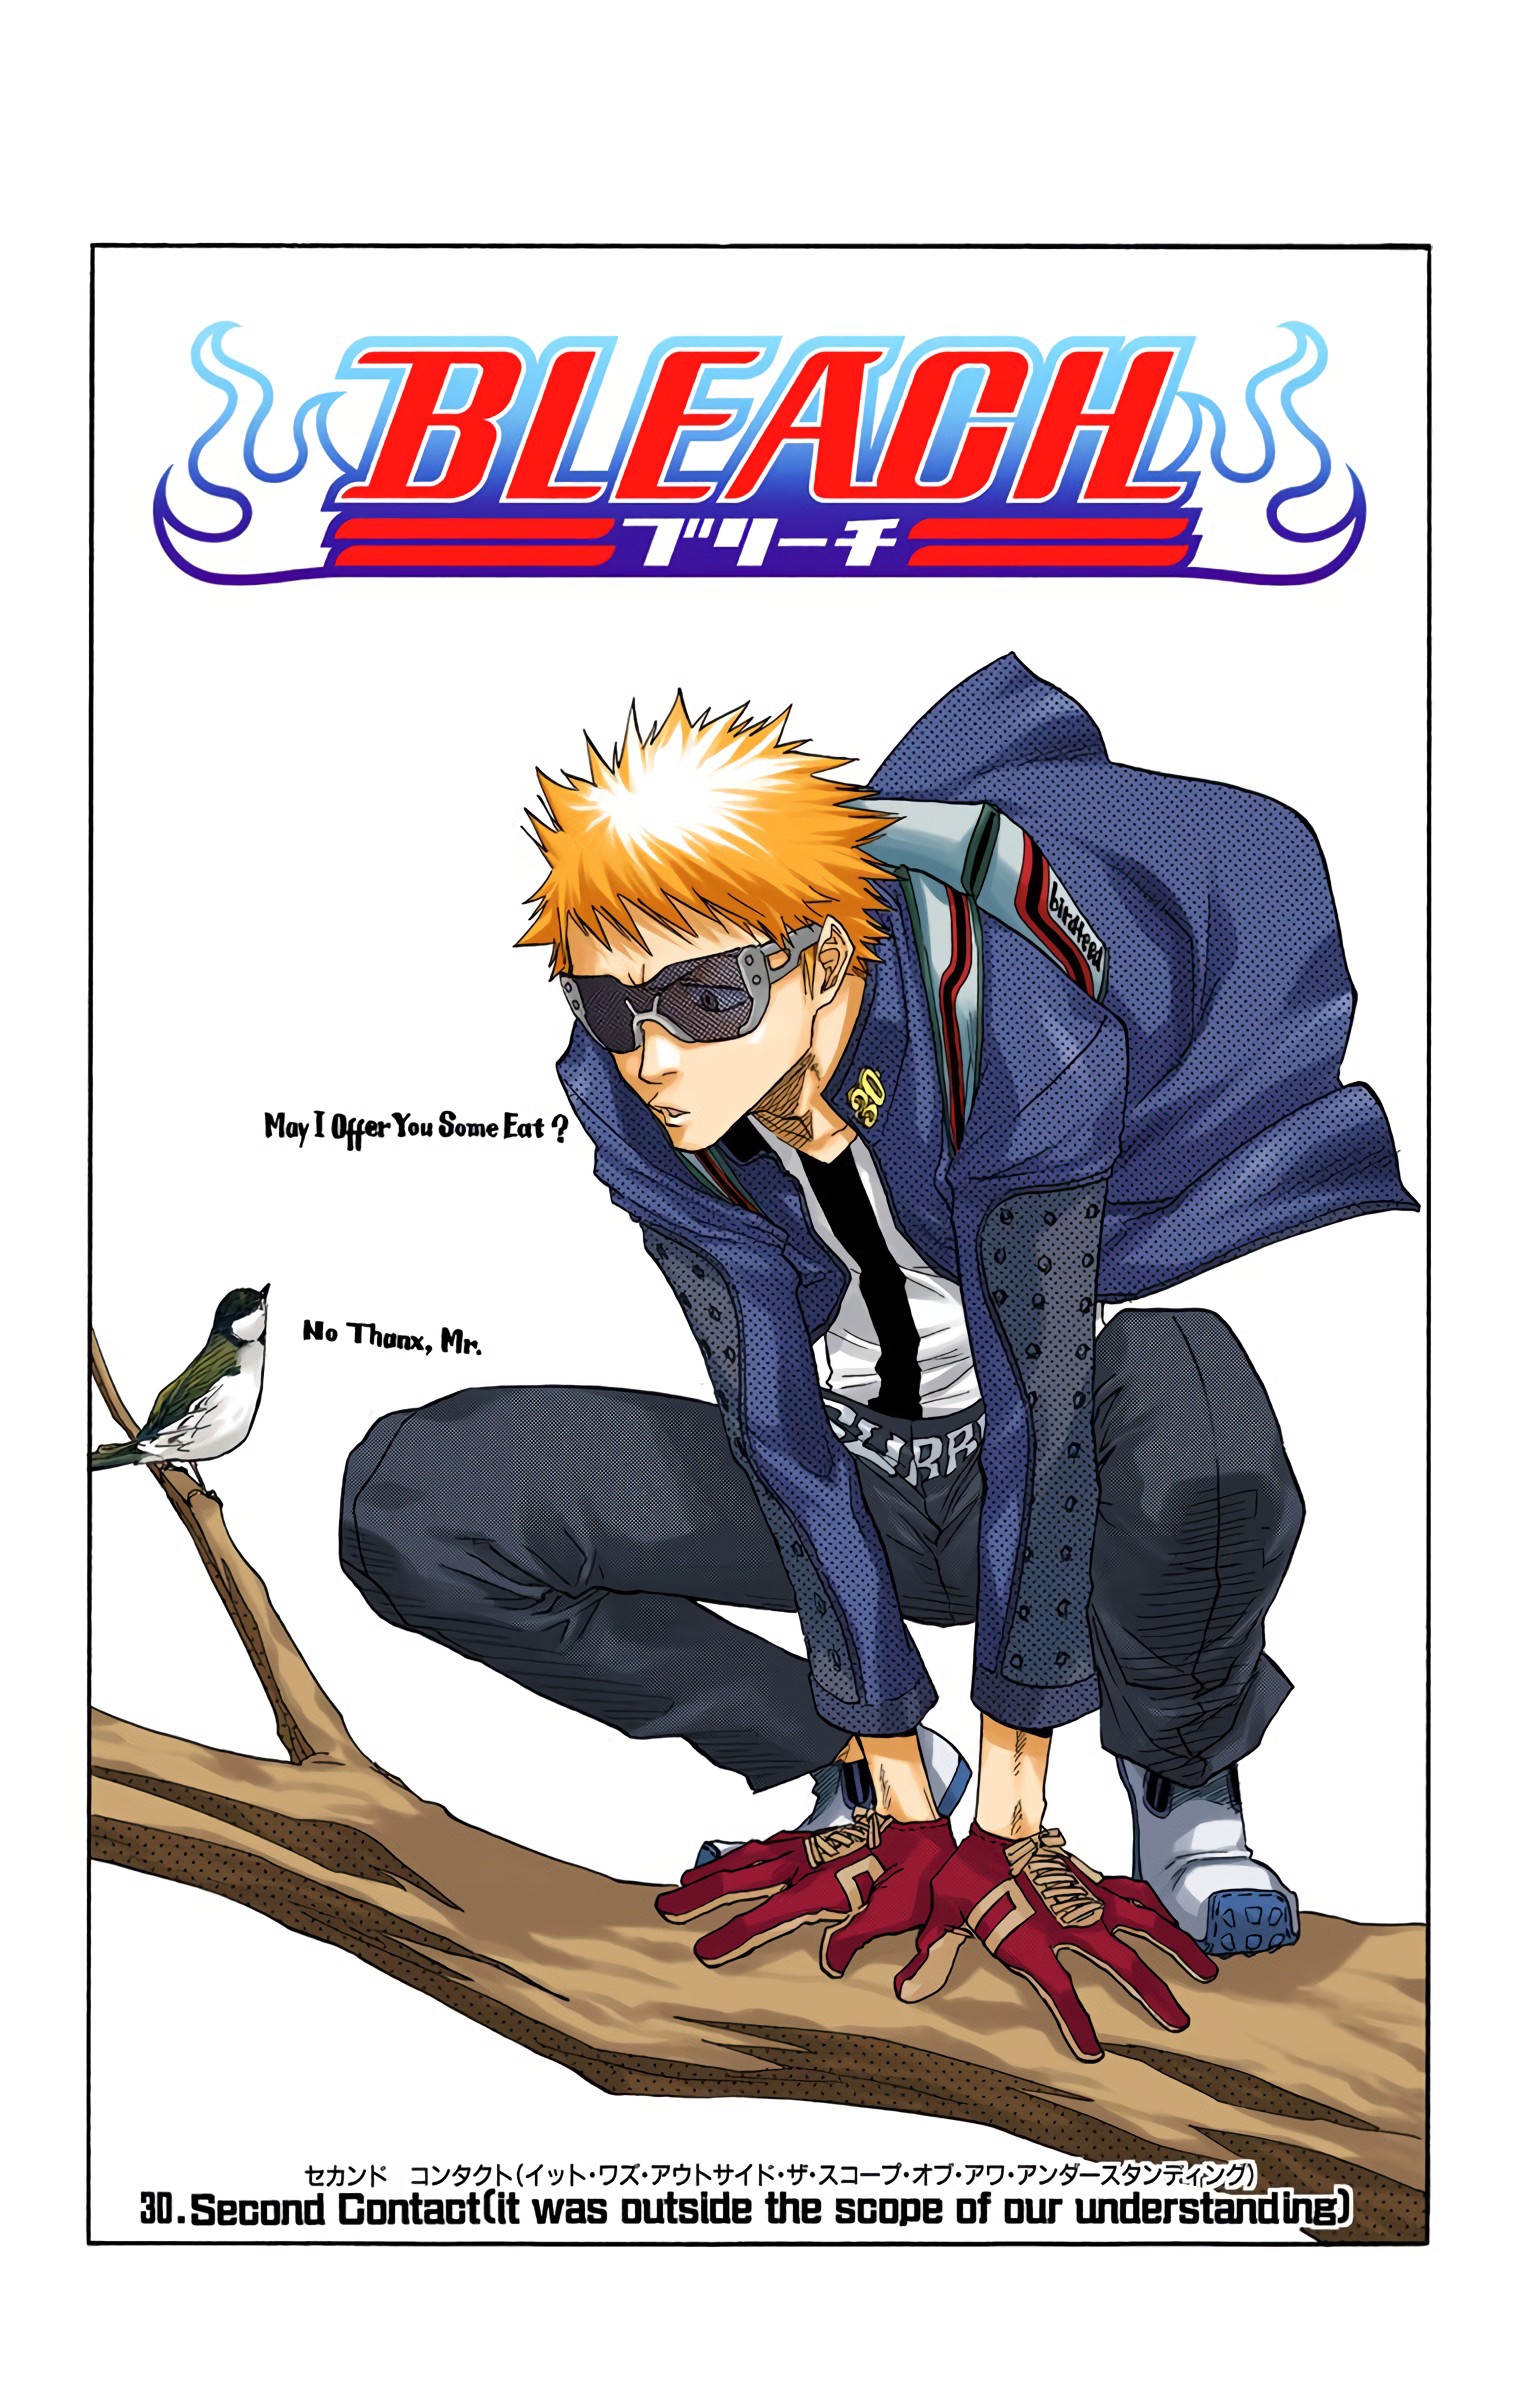 Bleach - Digital Colored Comics Vol.4 Chapter 30: Second Contact (It Was Beyond The Scope Of Our Understanding) - Picture 2